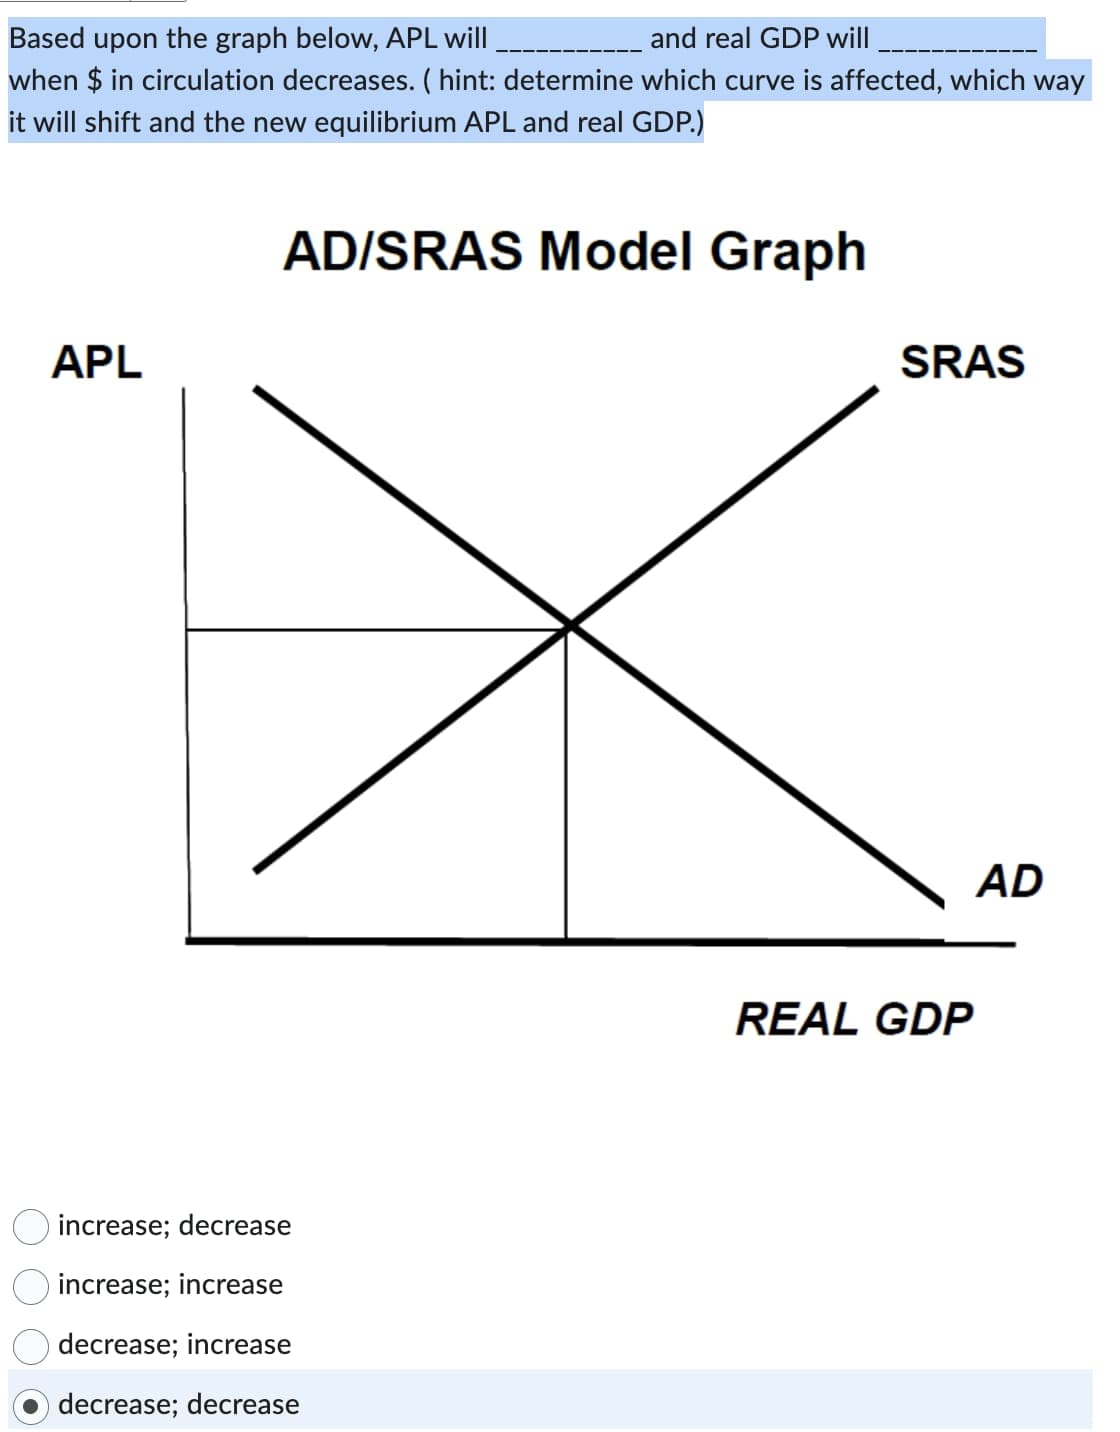 Based upon the graph below, APL will
and real GDP will
when $ in circulation decreases. ( hint: determine which curve is affected, which way
it will shift and the new equilibrium APL and real GDP.)
AD/SRAS Model Graph
APL
increase; decrease
increase; increase
decrease; increase
decrease; decrease
SRAS
REAL GDP
AD